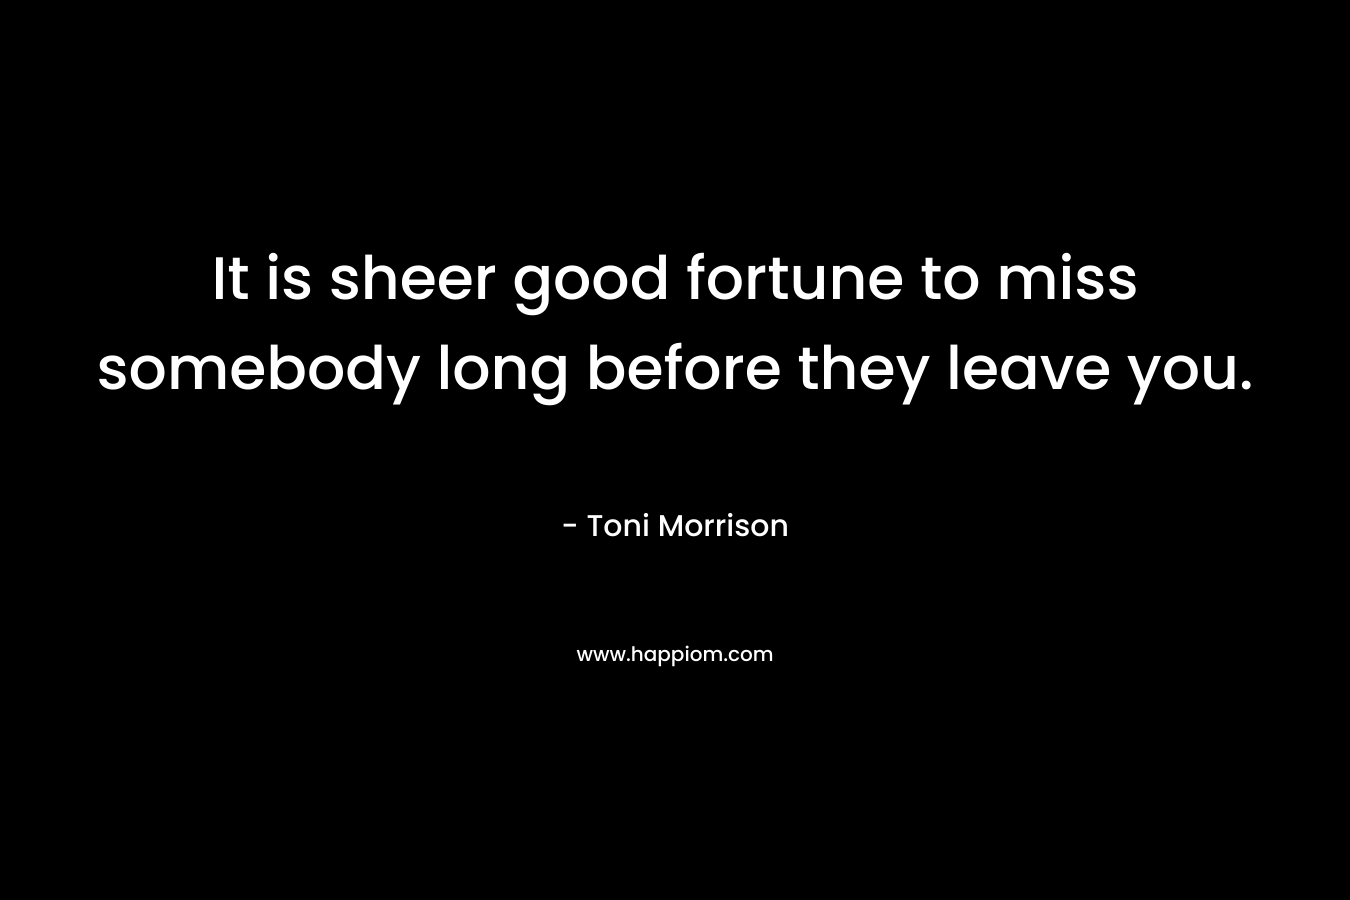 It is sheer good fortune to miss somebody long before they leave you. – Toni Morrison